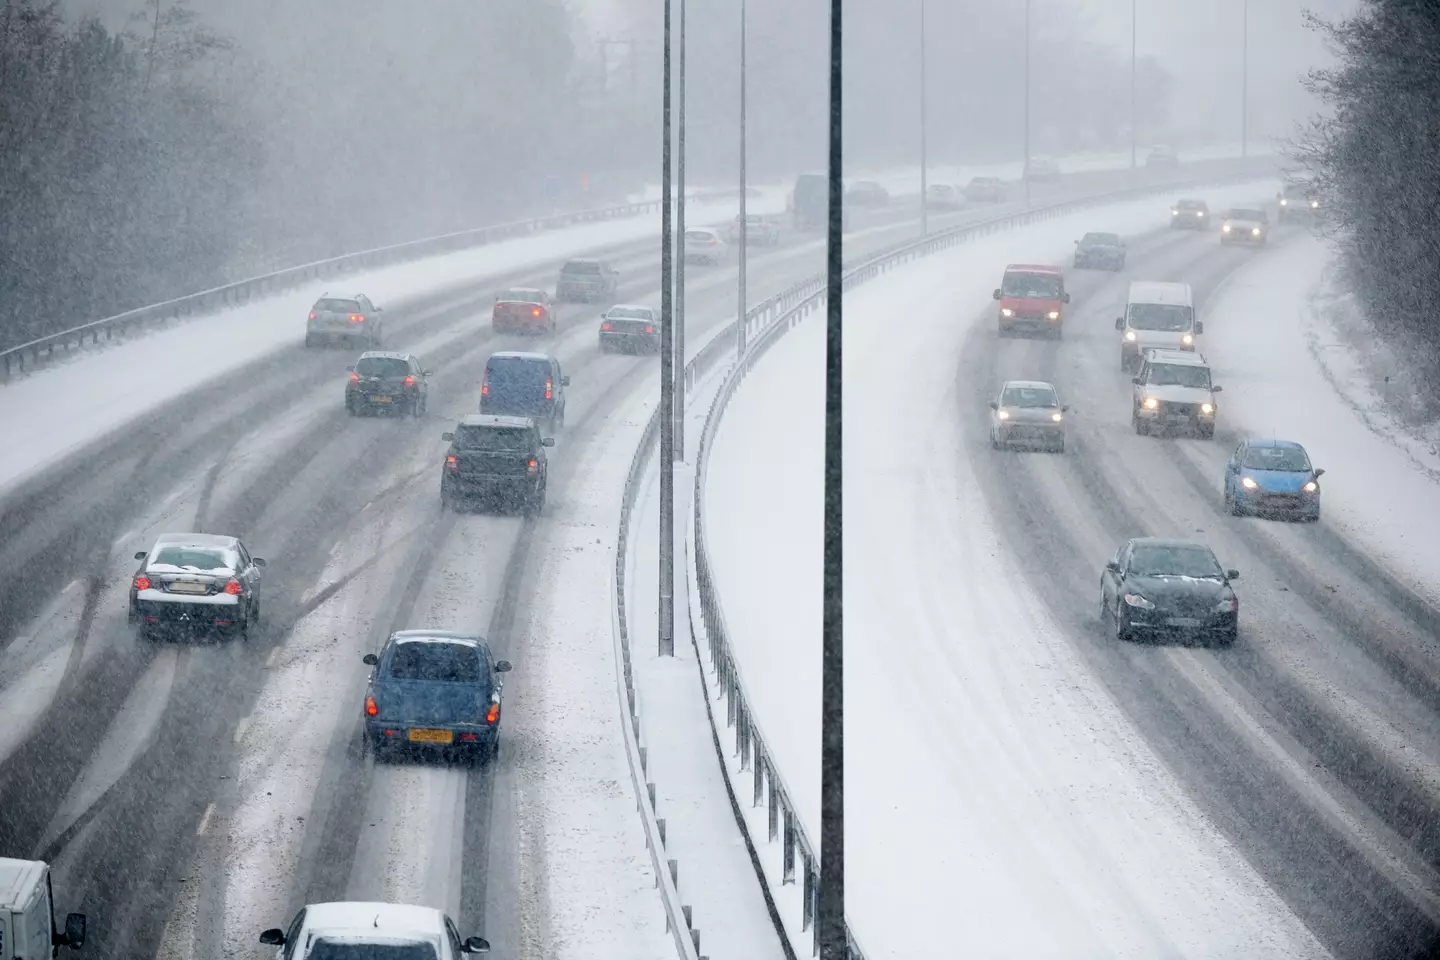 The Met Office has warned that the wintry weather could disrupt any travel plans.